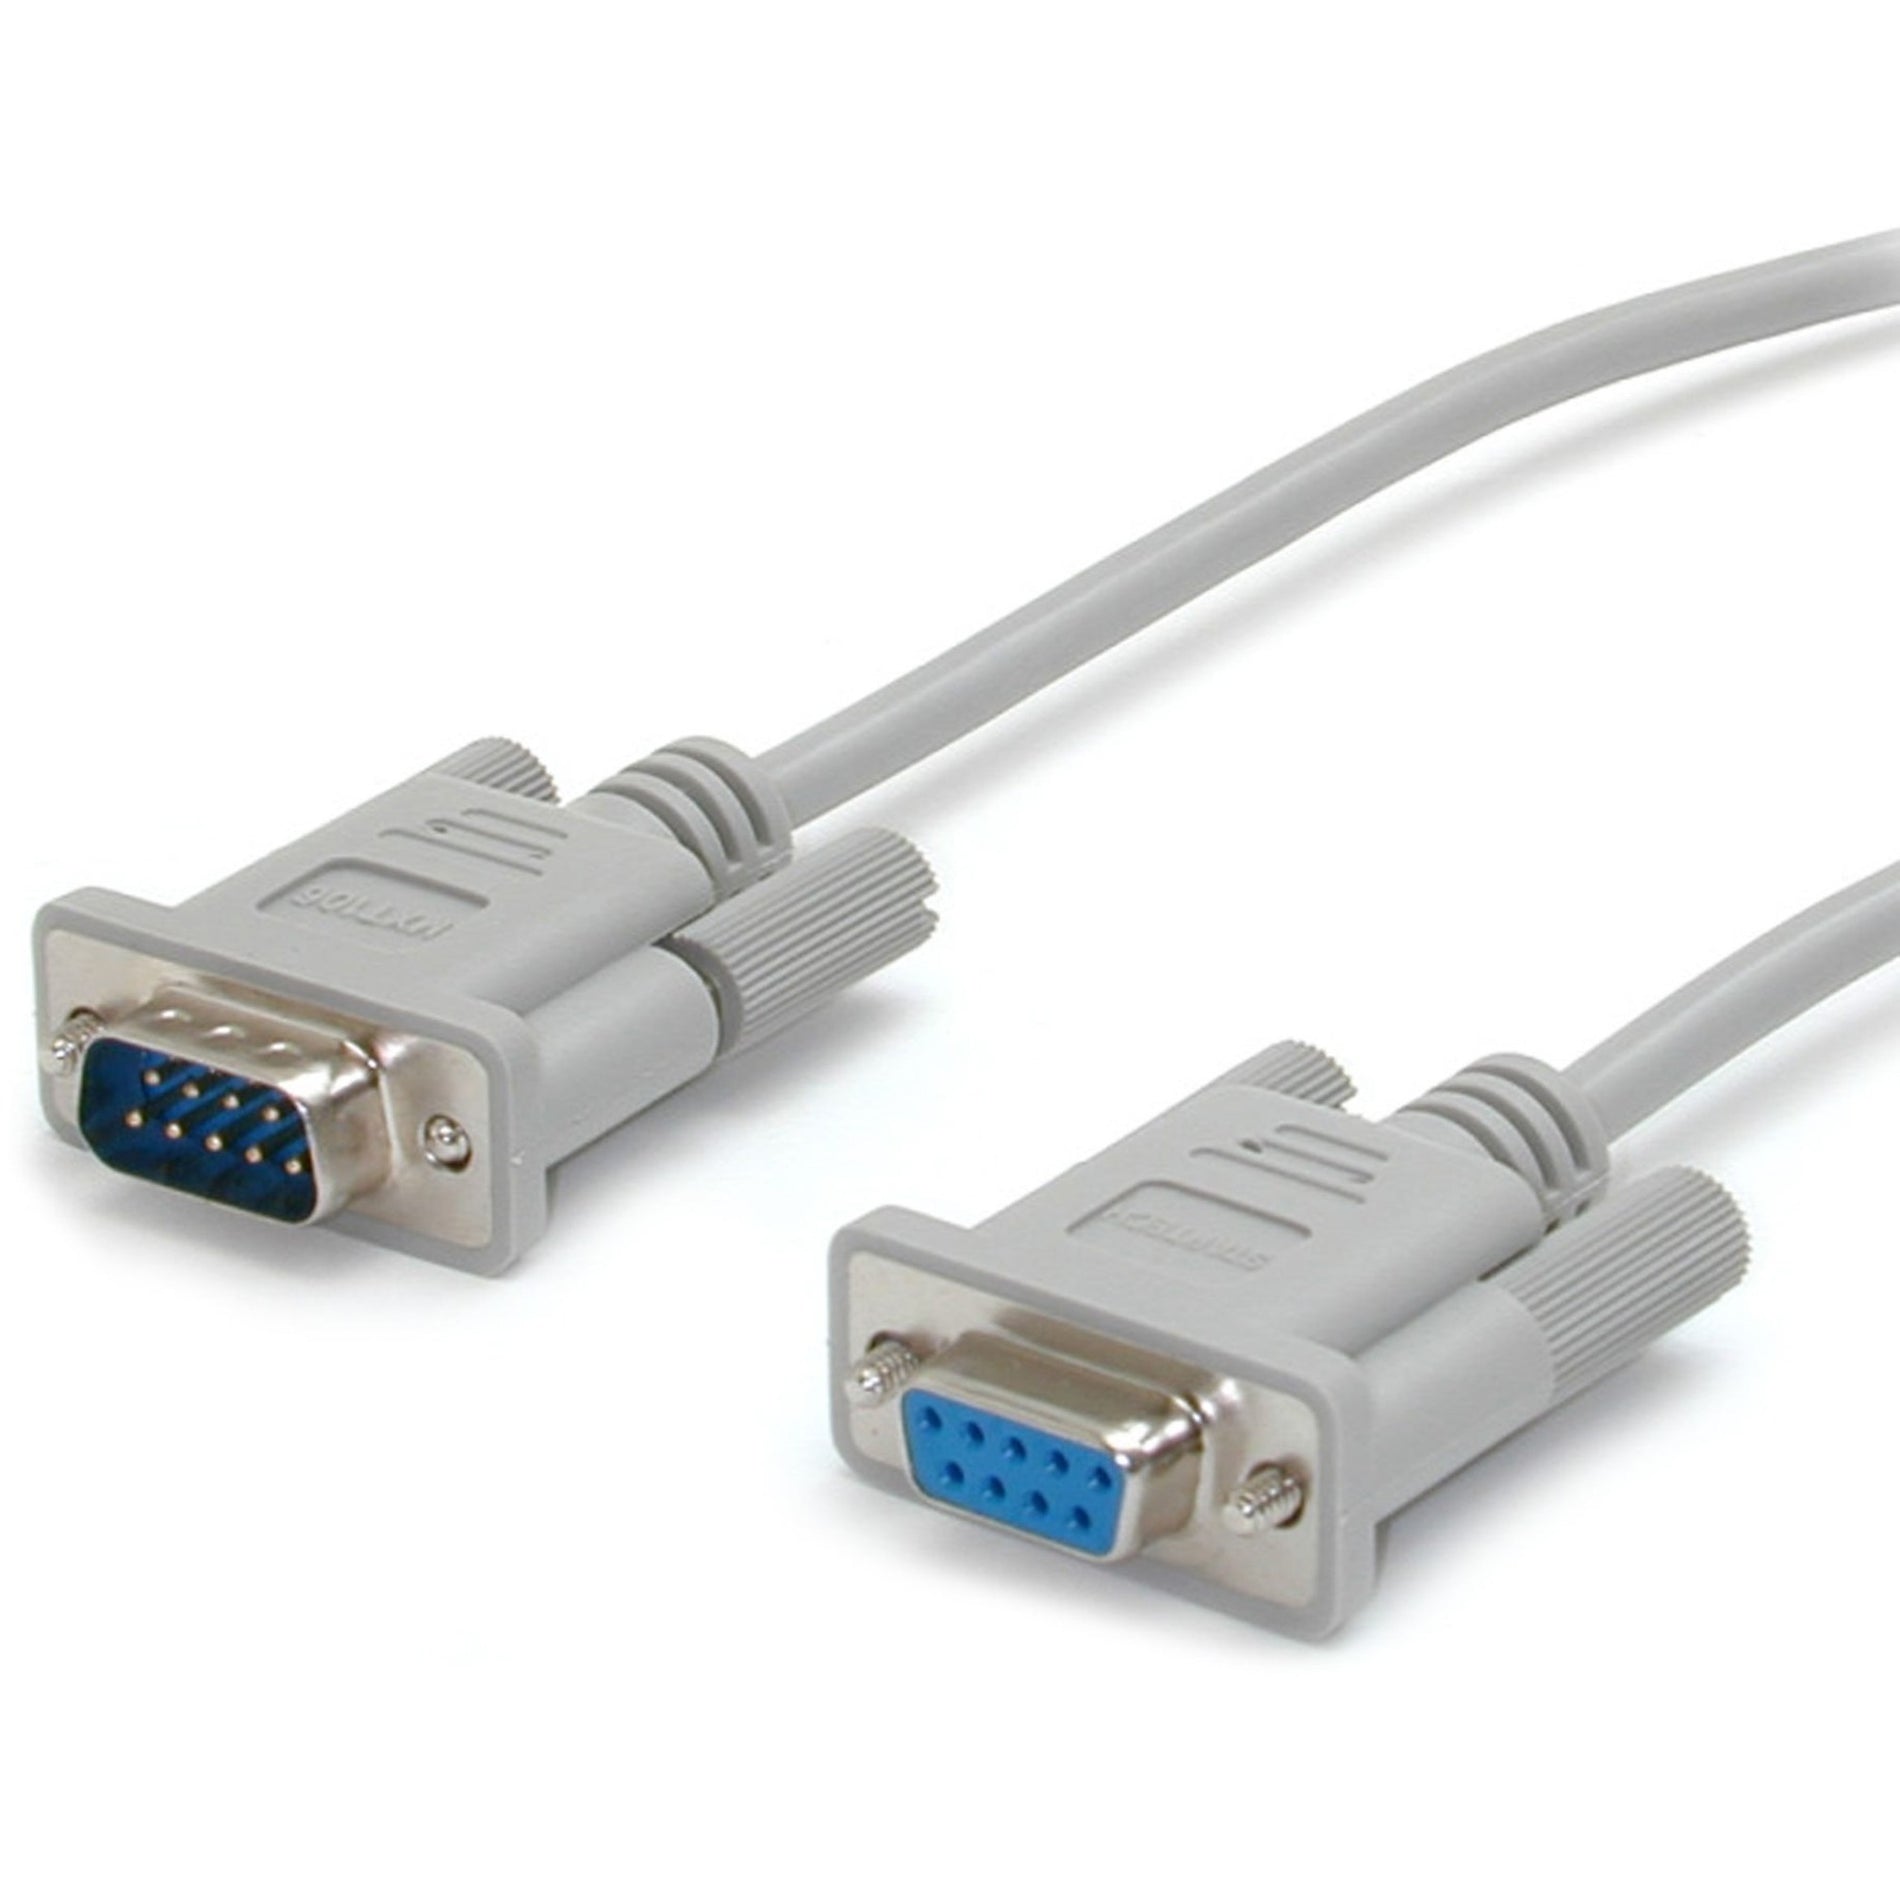 StarTech.com MXT106 15ft Straight Through DB9 Serial Cable - Mouse Extension Cable External, Gray